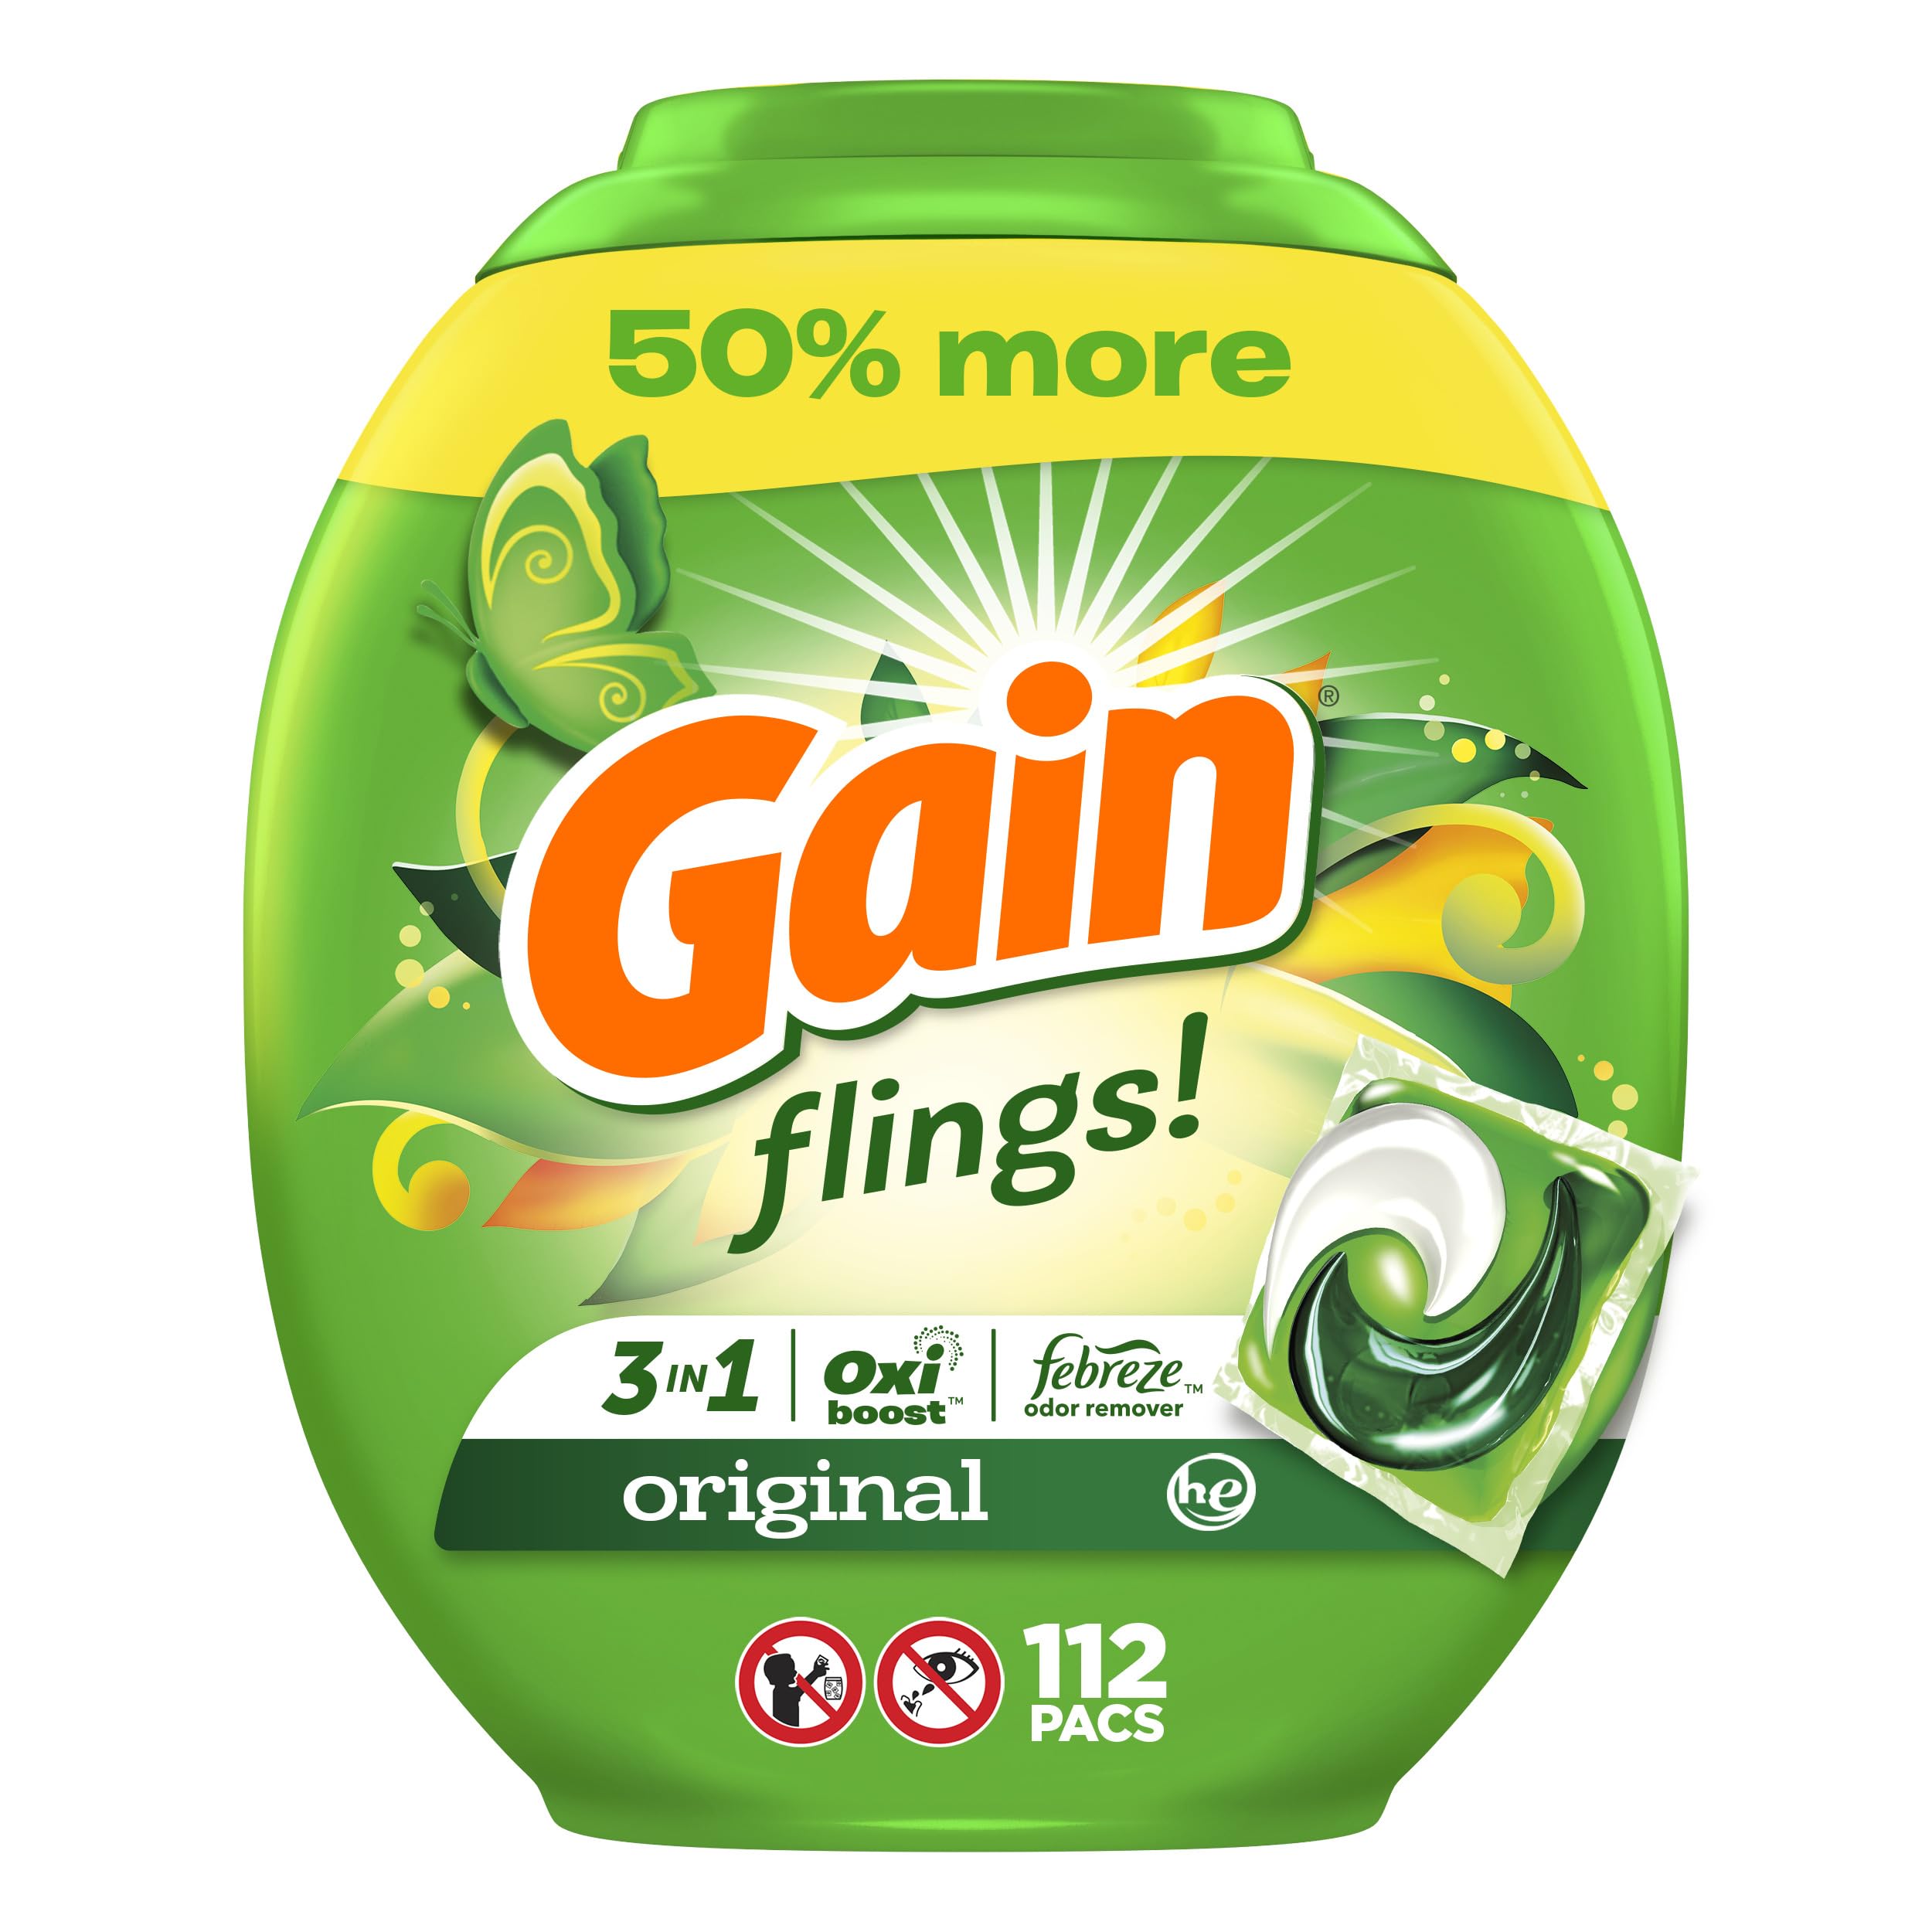 112-Count Gain flings Laundry Detergent Soap Pacs (Original) + $17 Amazon Credit $25.90 w/ S&S + Free Shipping w/ Prime or on $35+